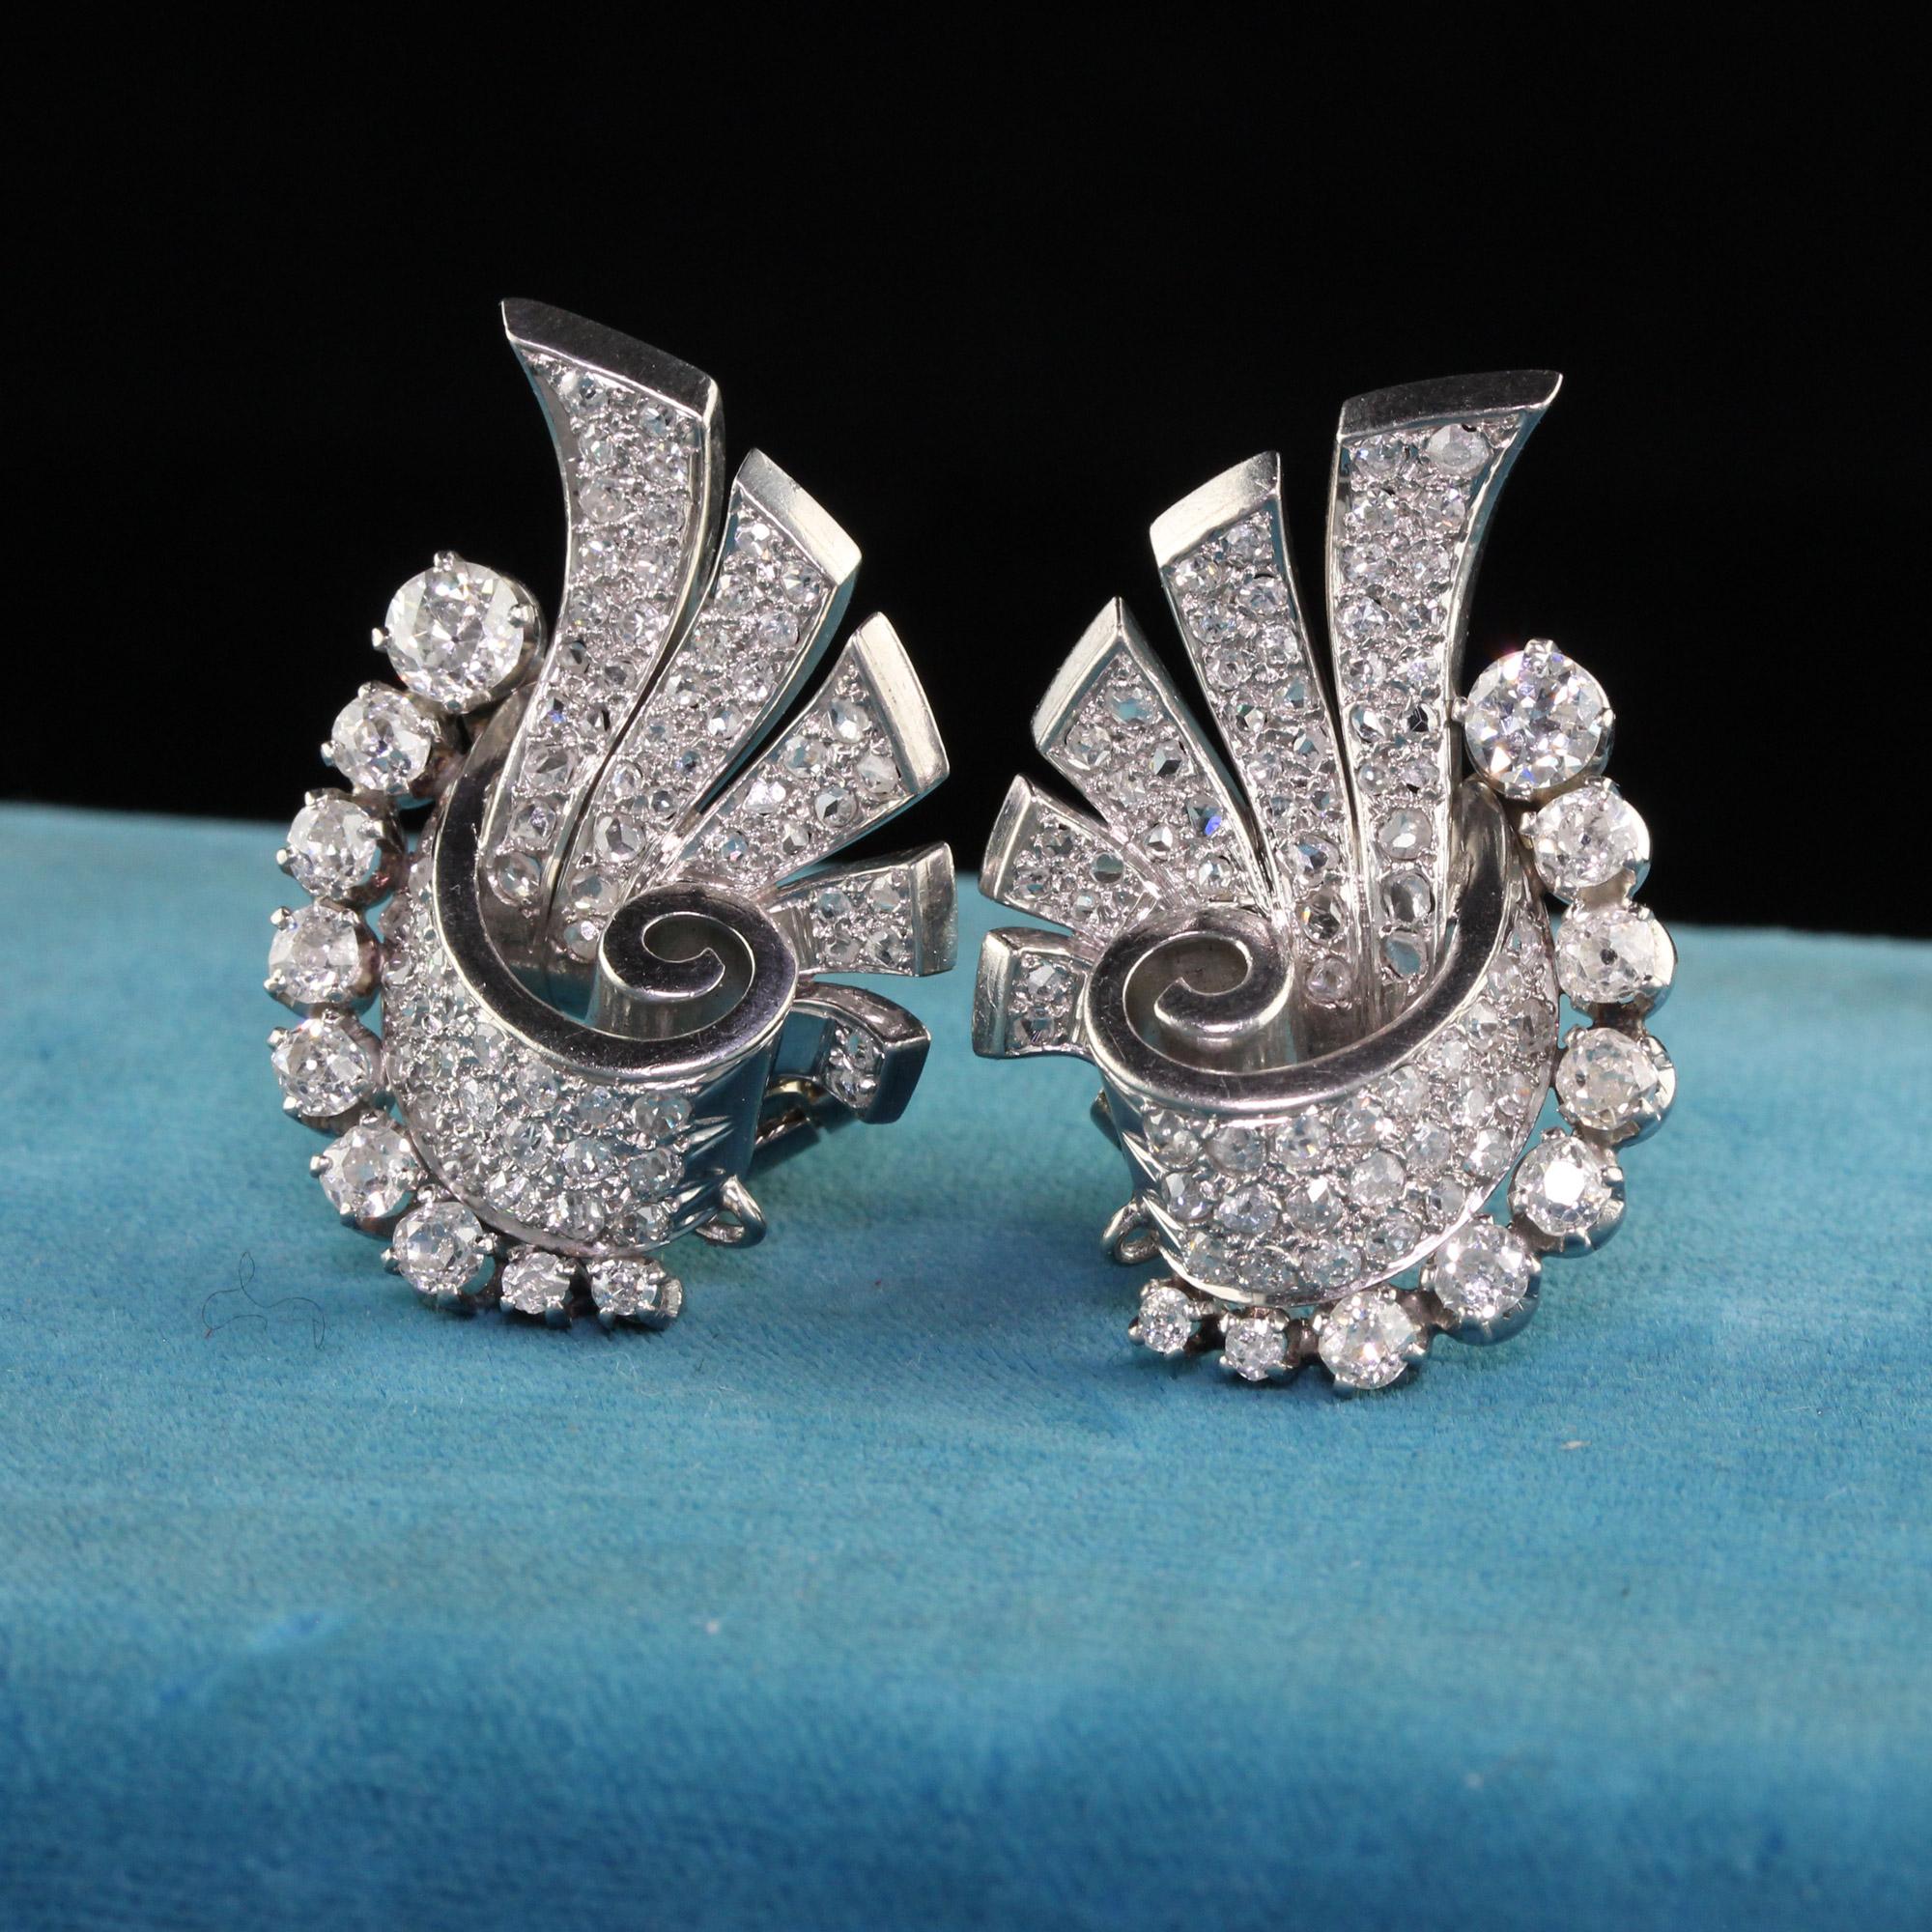 Beautiful Antique Art Deco Platinum Old Mine Cut and Rose Cut Diamond Earrings. These gorgeous pair of earrings are crafted in platinum and 18k white gold clip backs. The earrings have old mine cut diamonds and rose cut diamonds set along the top of